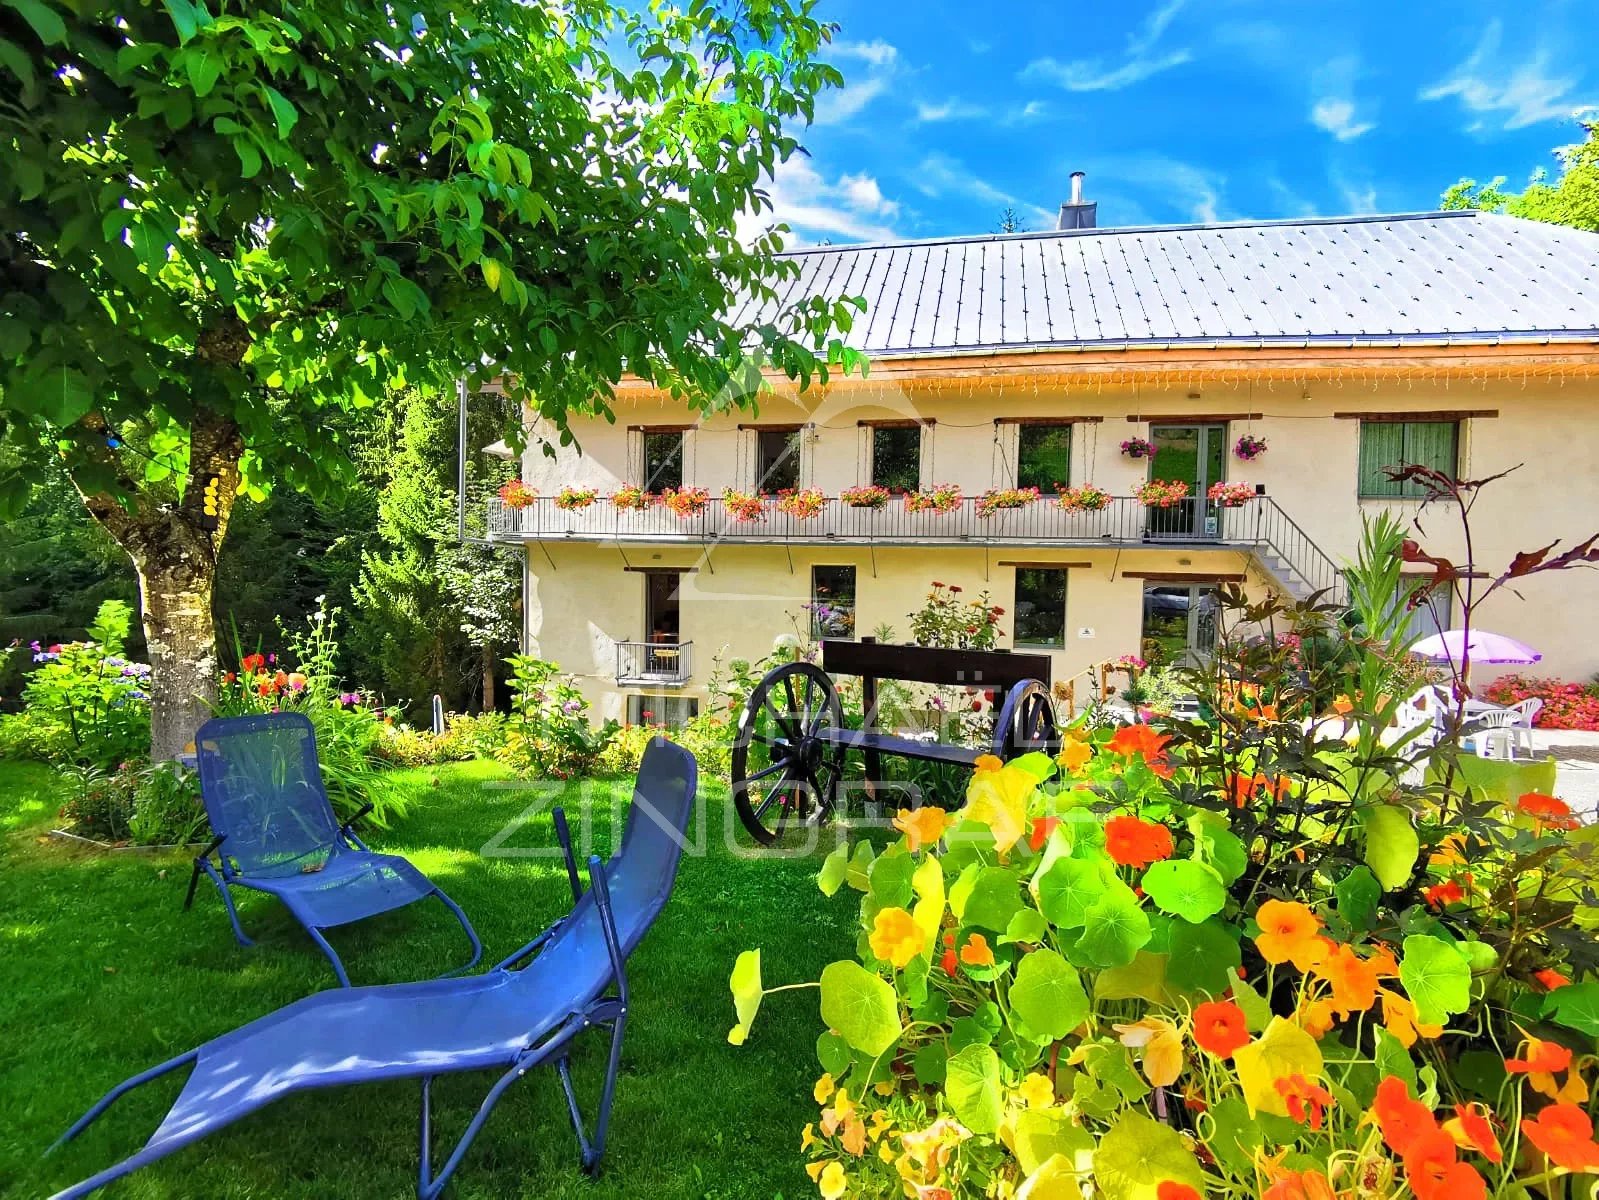 Private estate with large recent chalet - Large volumes, nature and calm - High rental yield - Cordon